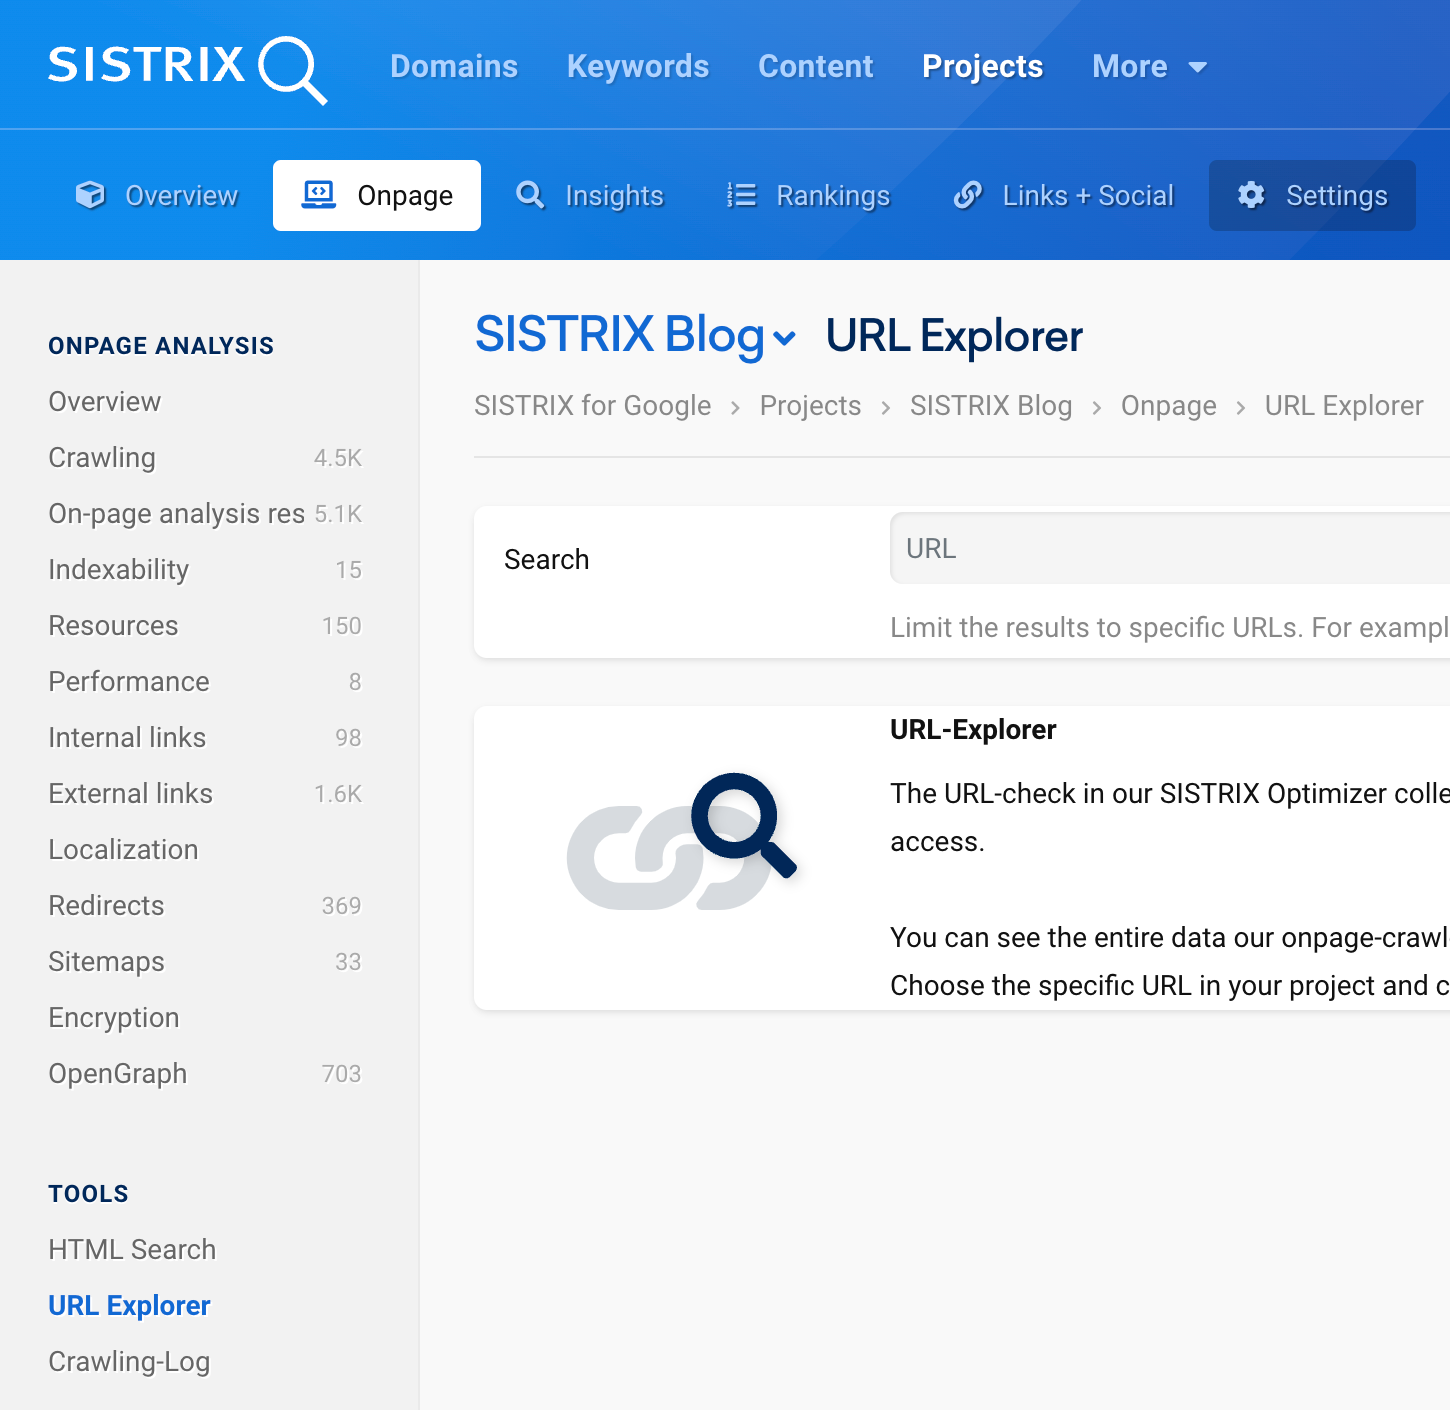 The navigation to the URL Explorer in SISTRIX.